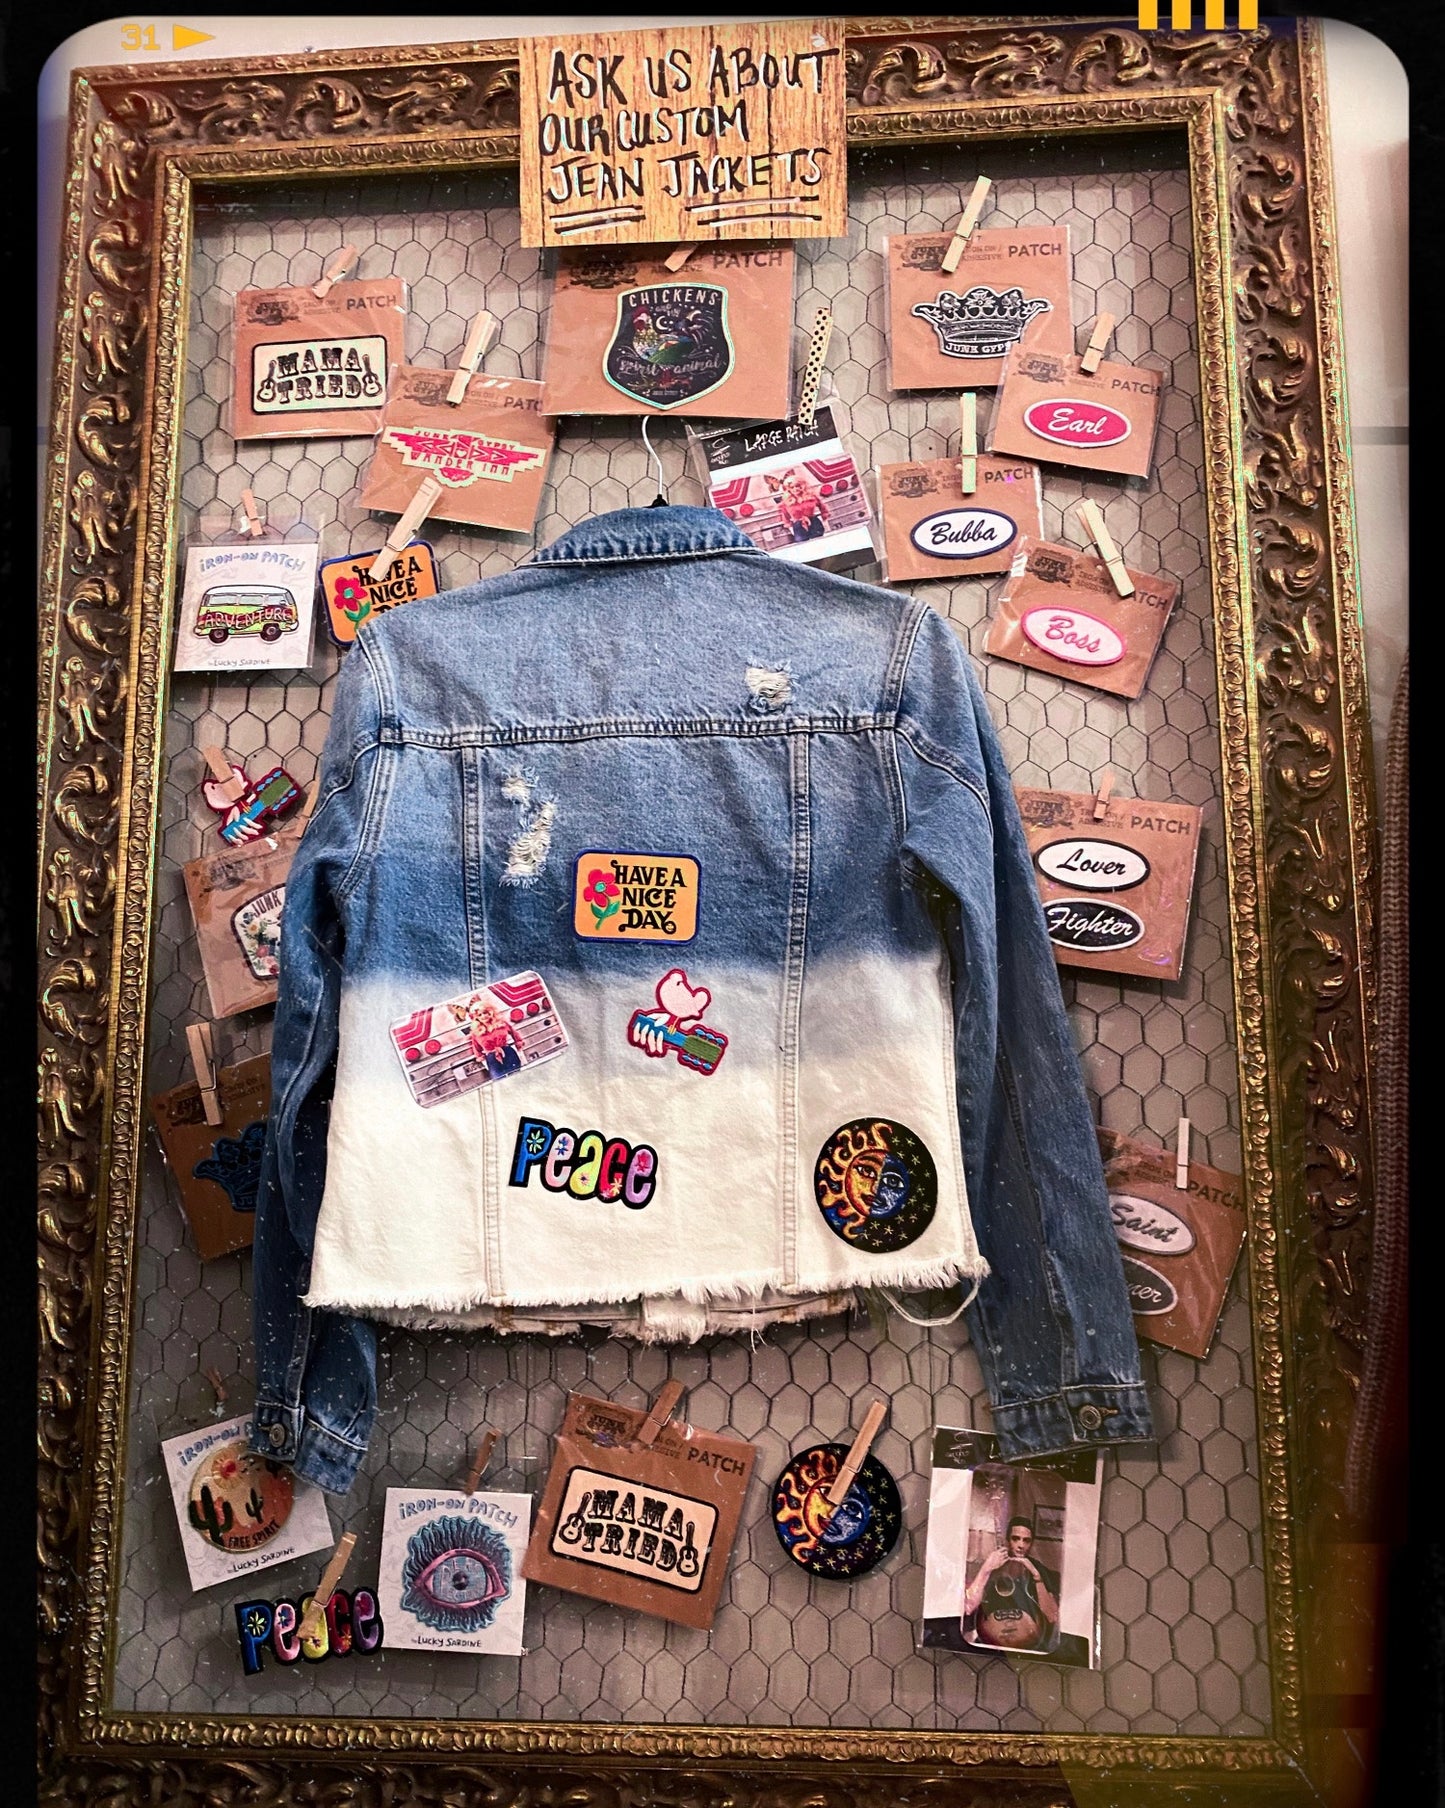 Small Jean jacket with patches